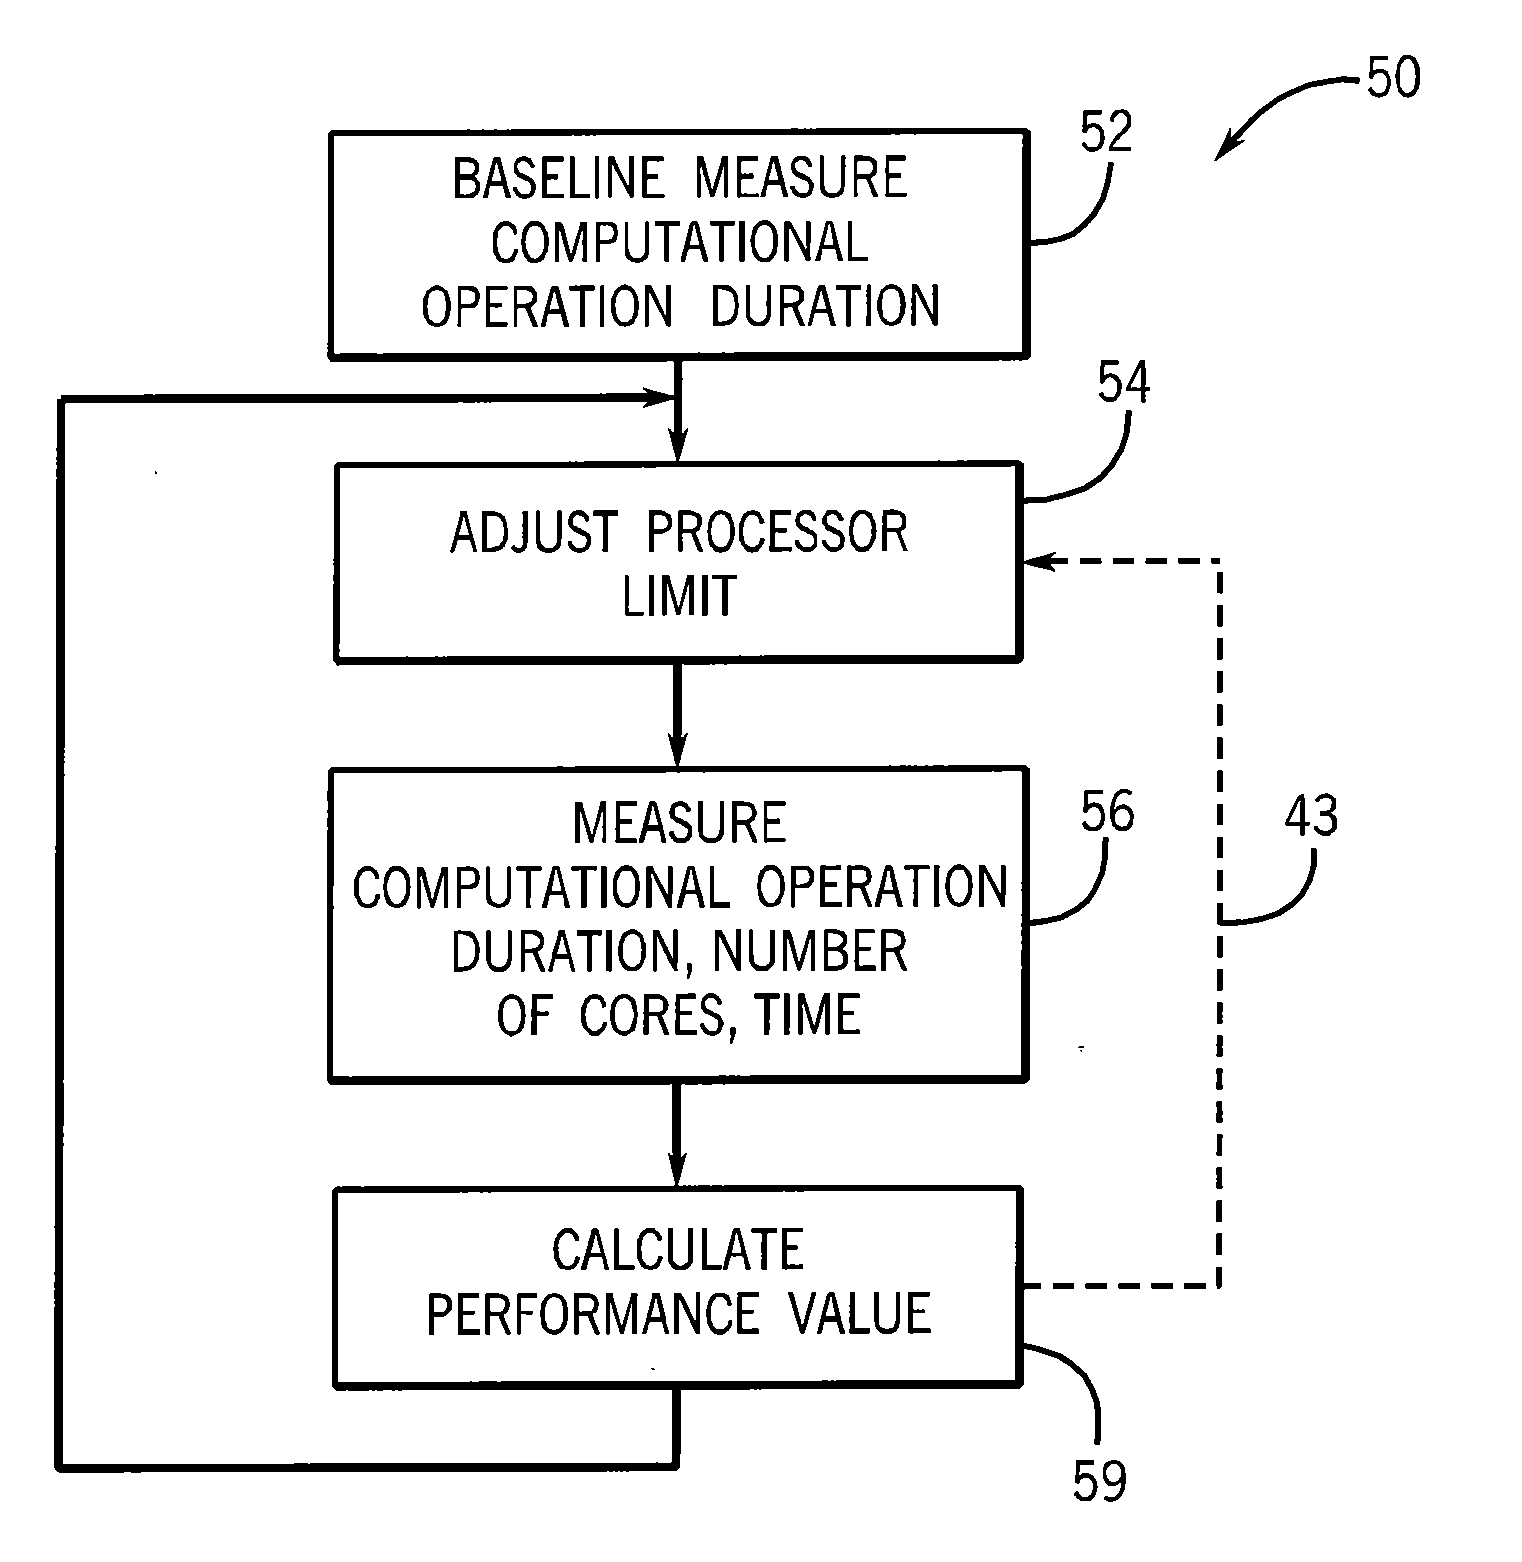 System and Method for Controlling Excessive Parallelism in Multiprocessor Systems